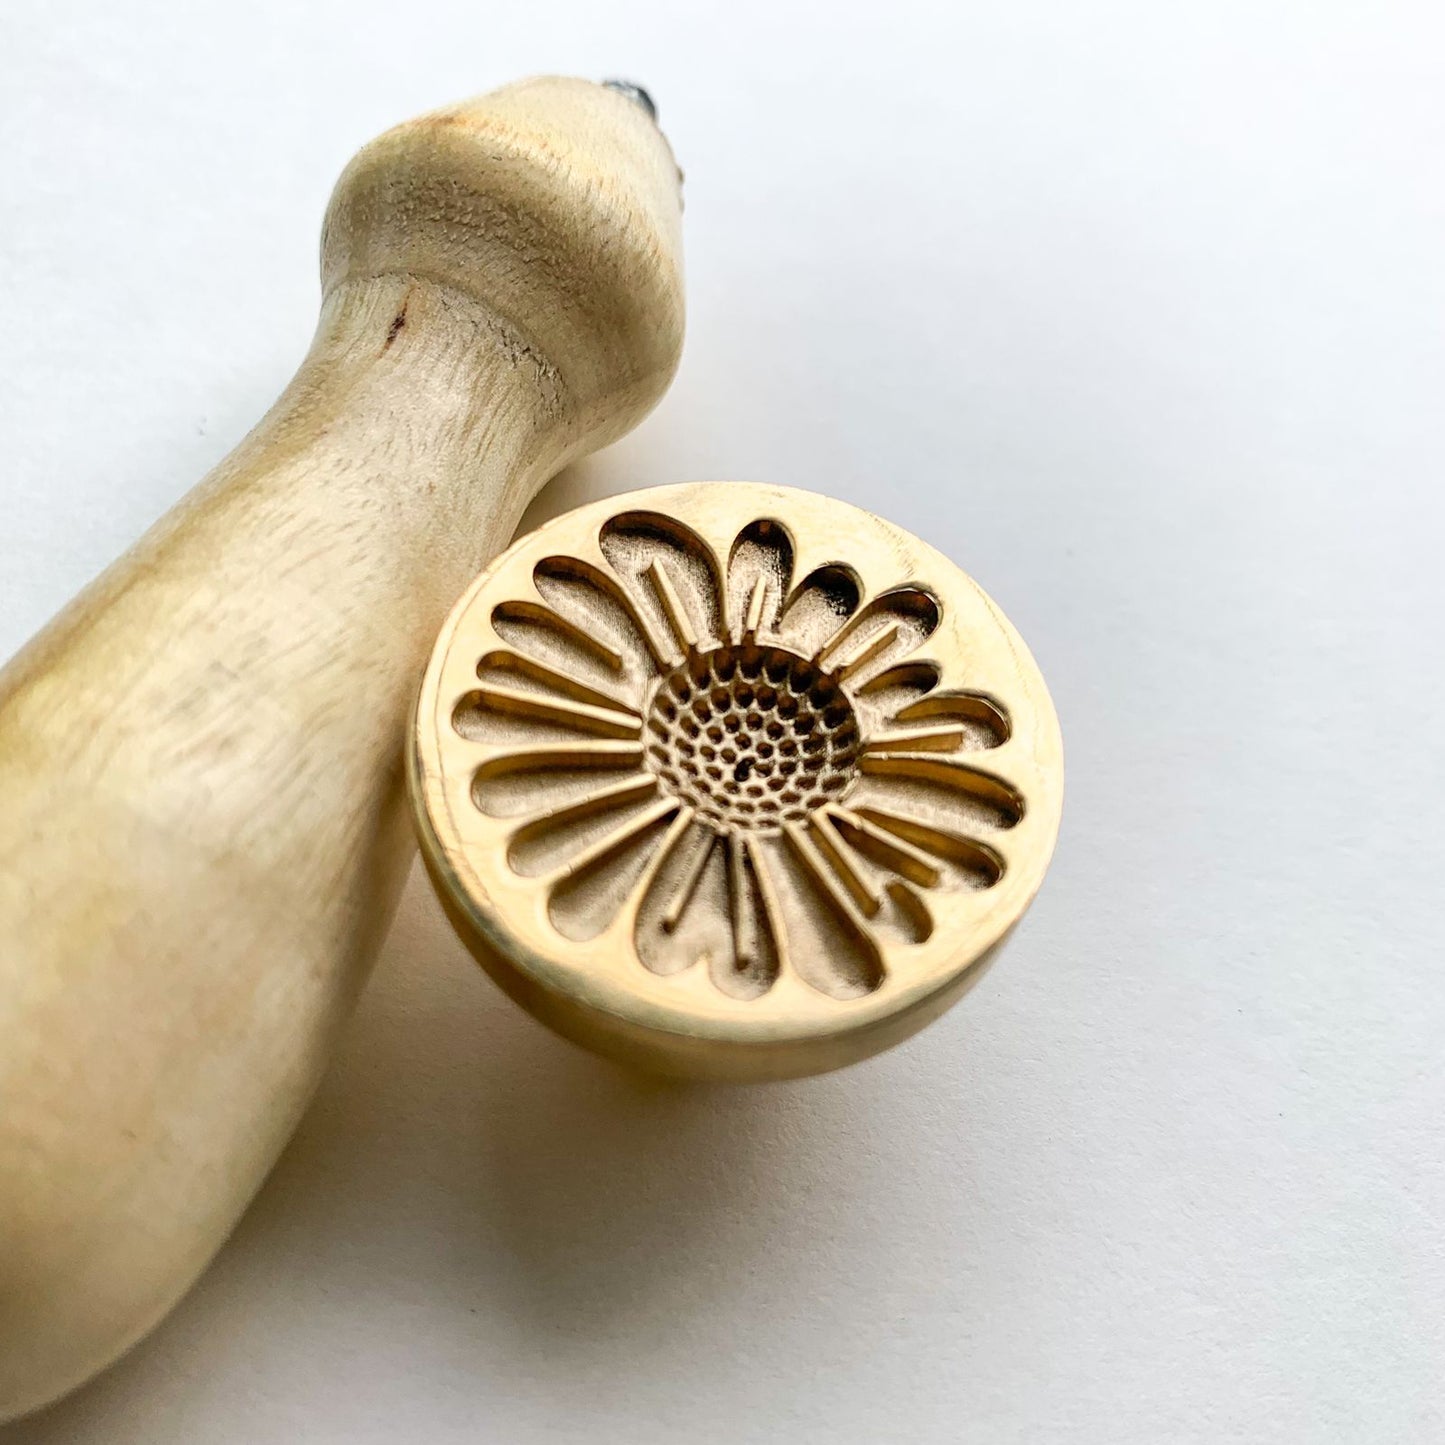 AW80 - 18B - Premium 3D Seal Wax Stamp with Wooden Handle | 30mm Diameter